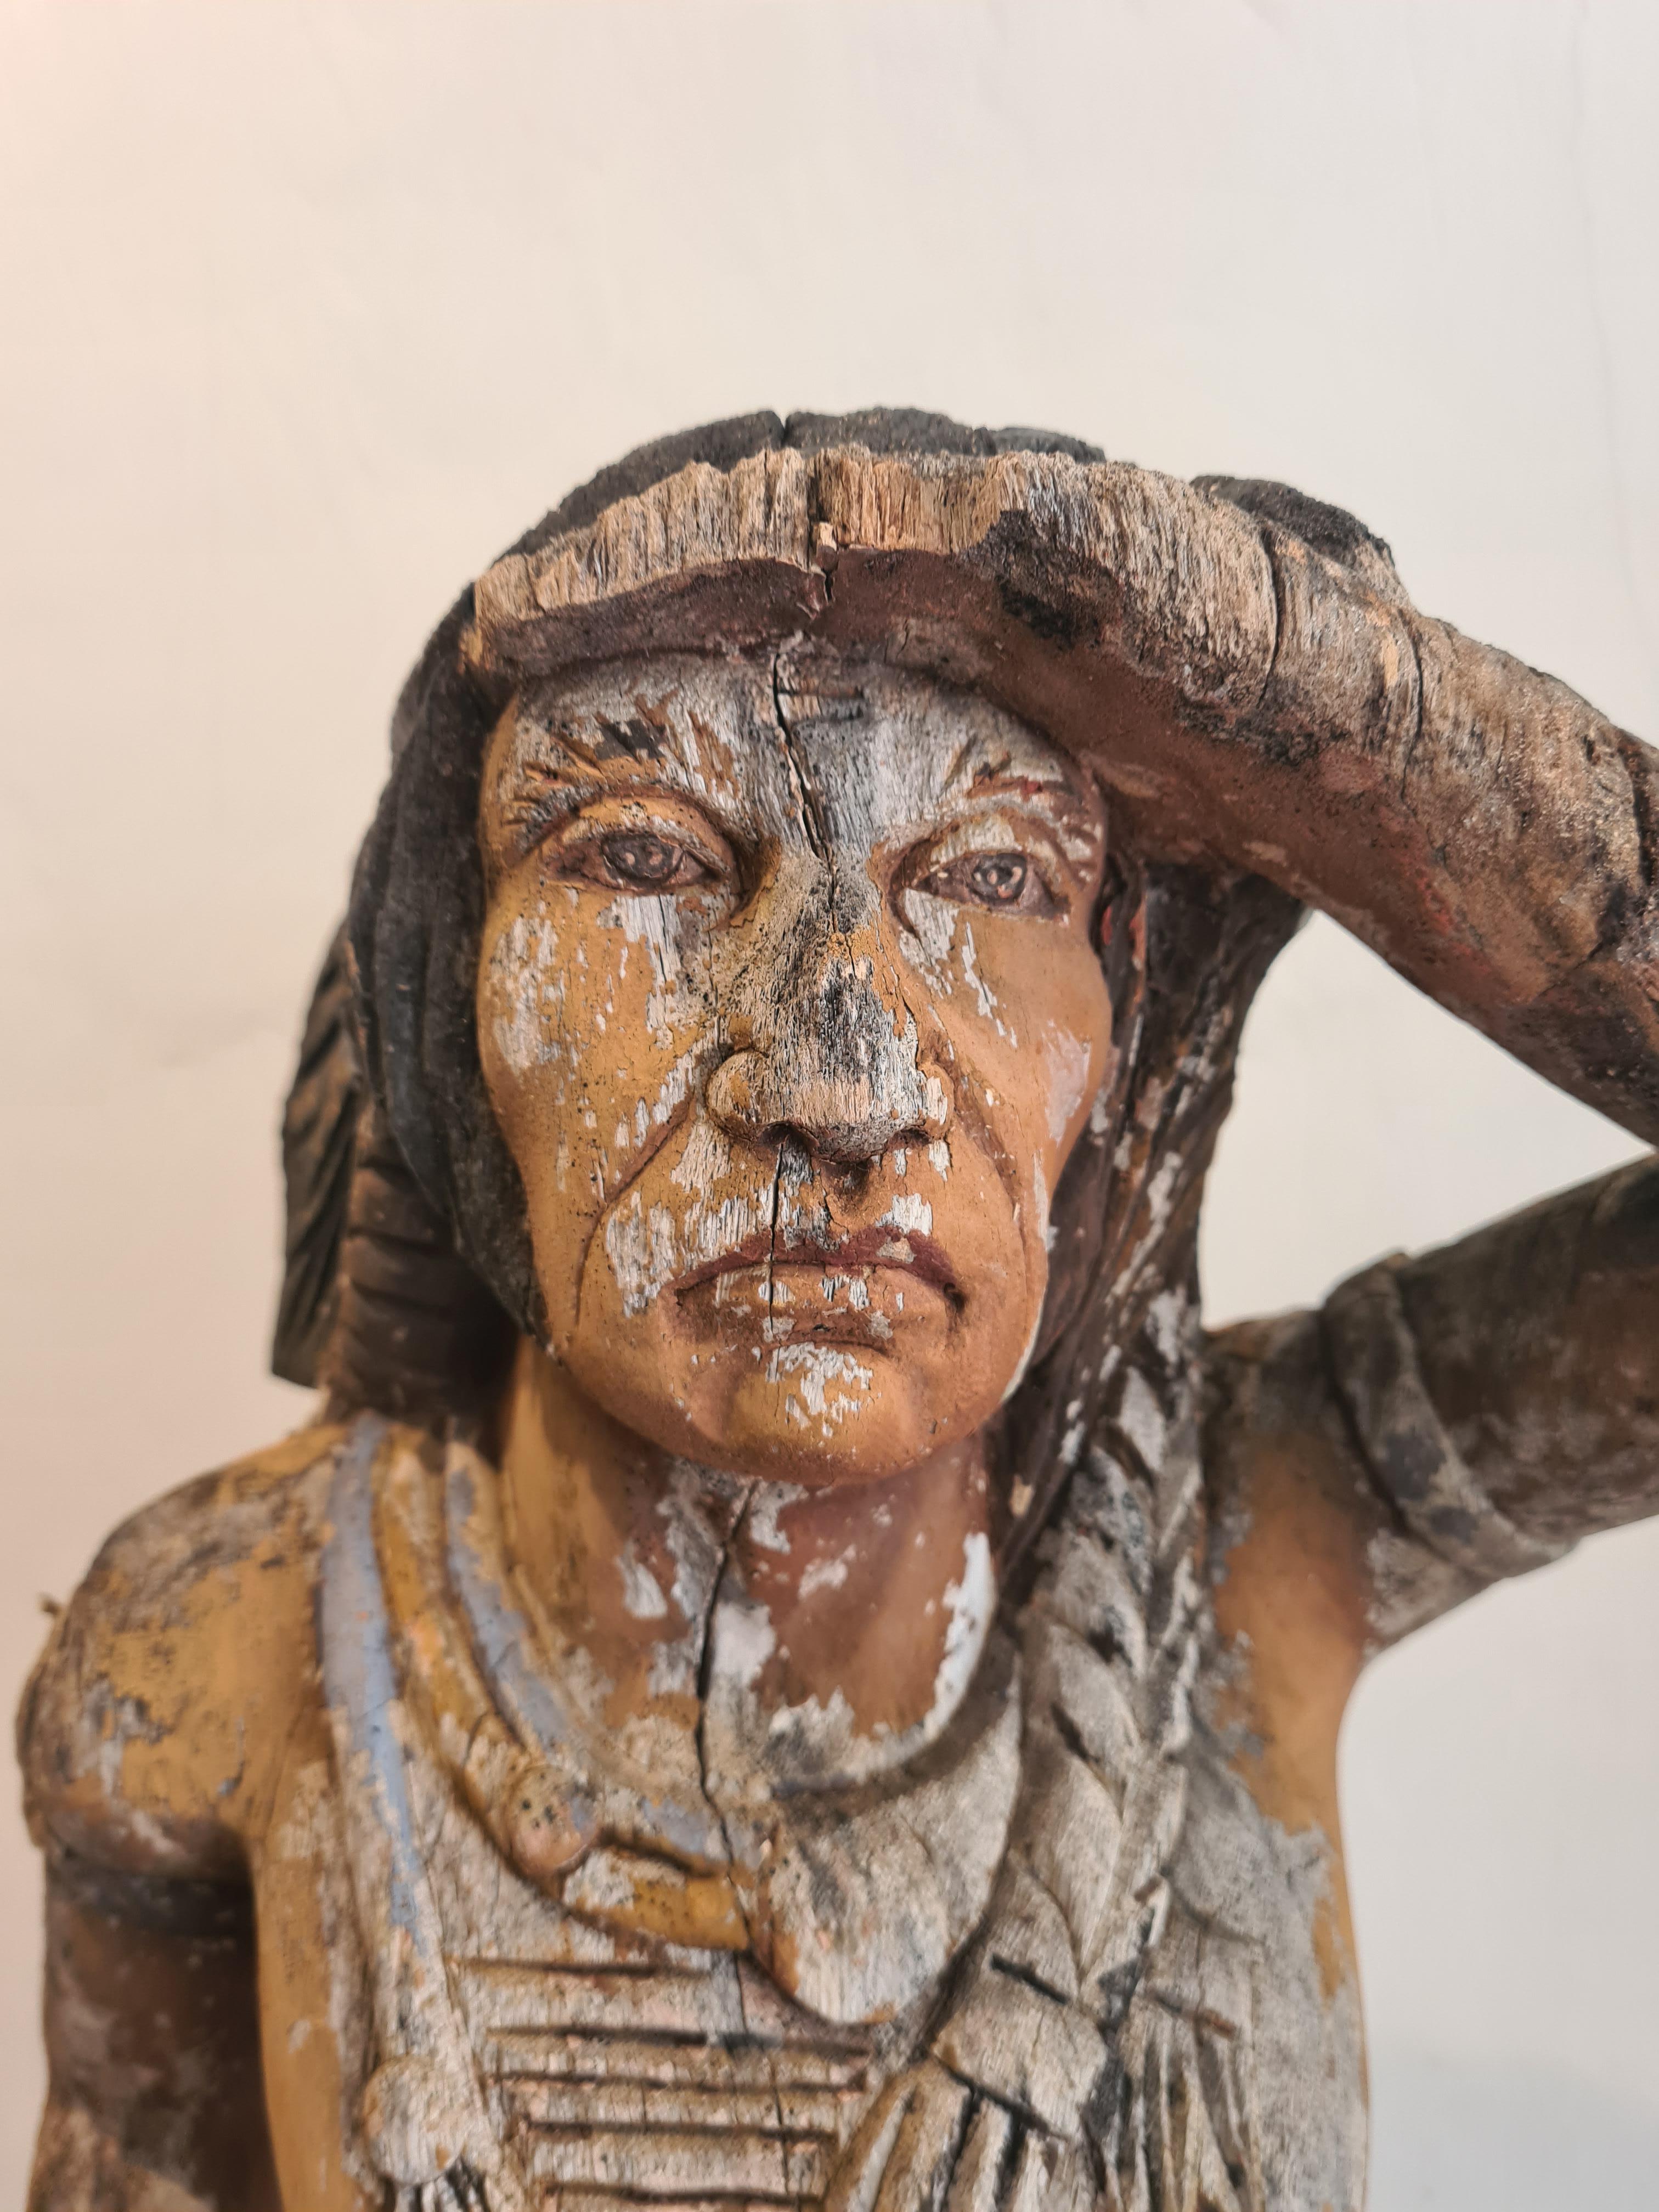 A 20th Century wood carved male figure, a 'Cigar Store Indian' with original polychrome decoration.

A now controversial subject, but none the less charming rendition, of a native North American man originally probably used as an advertising figure.